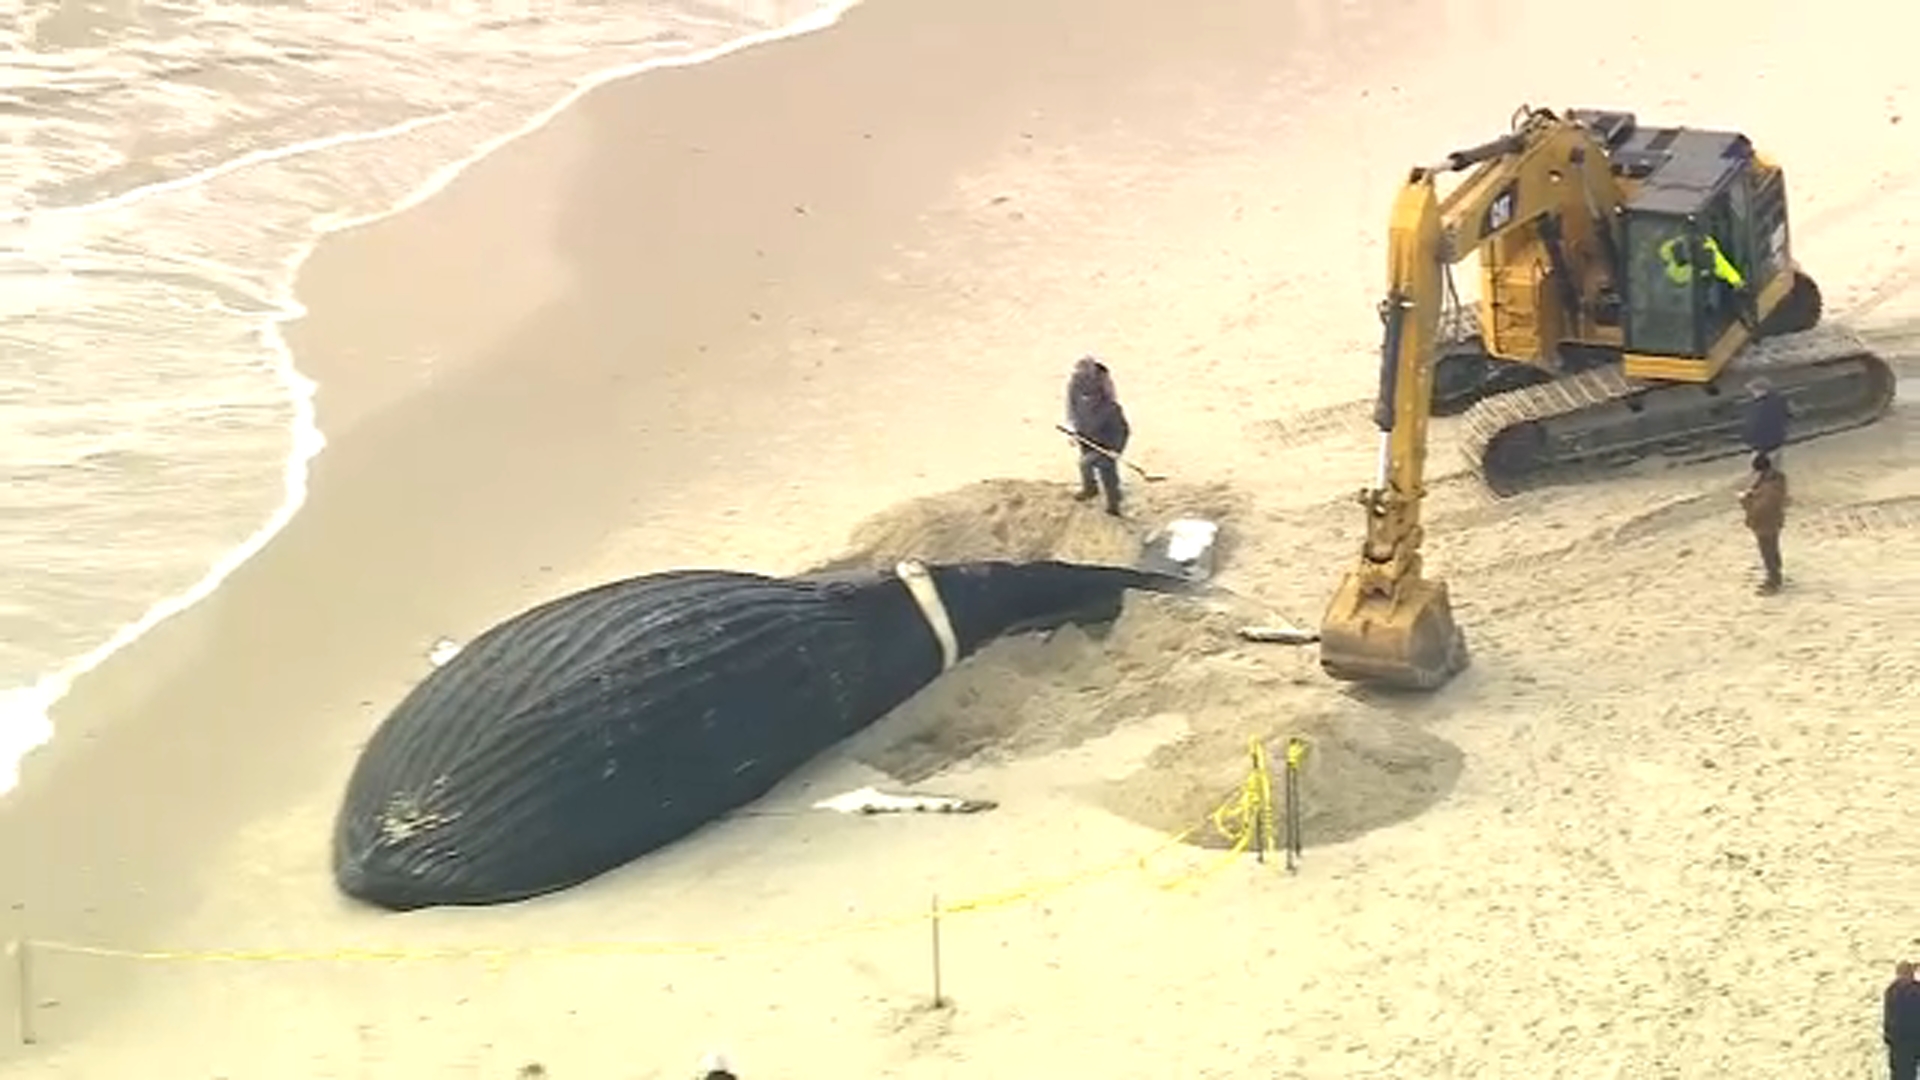 beached whale